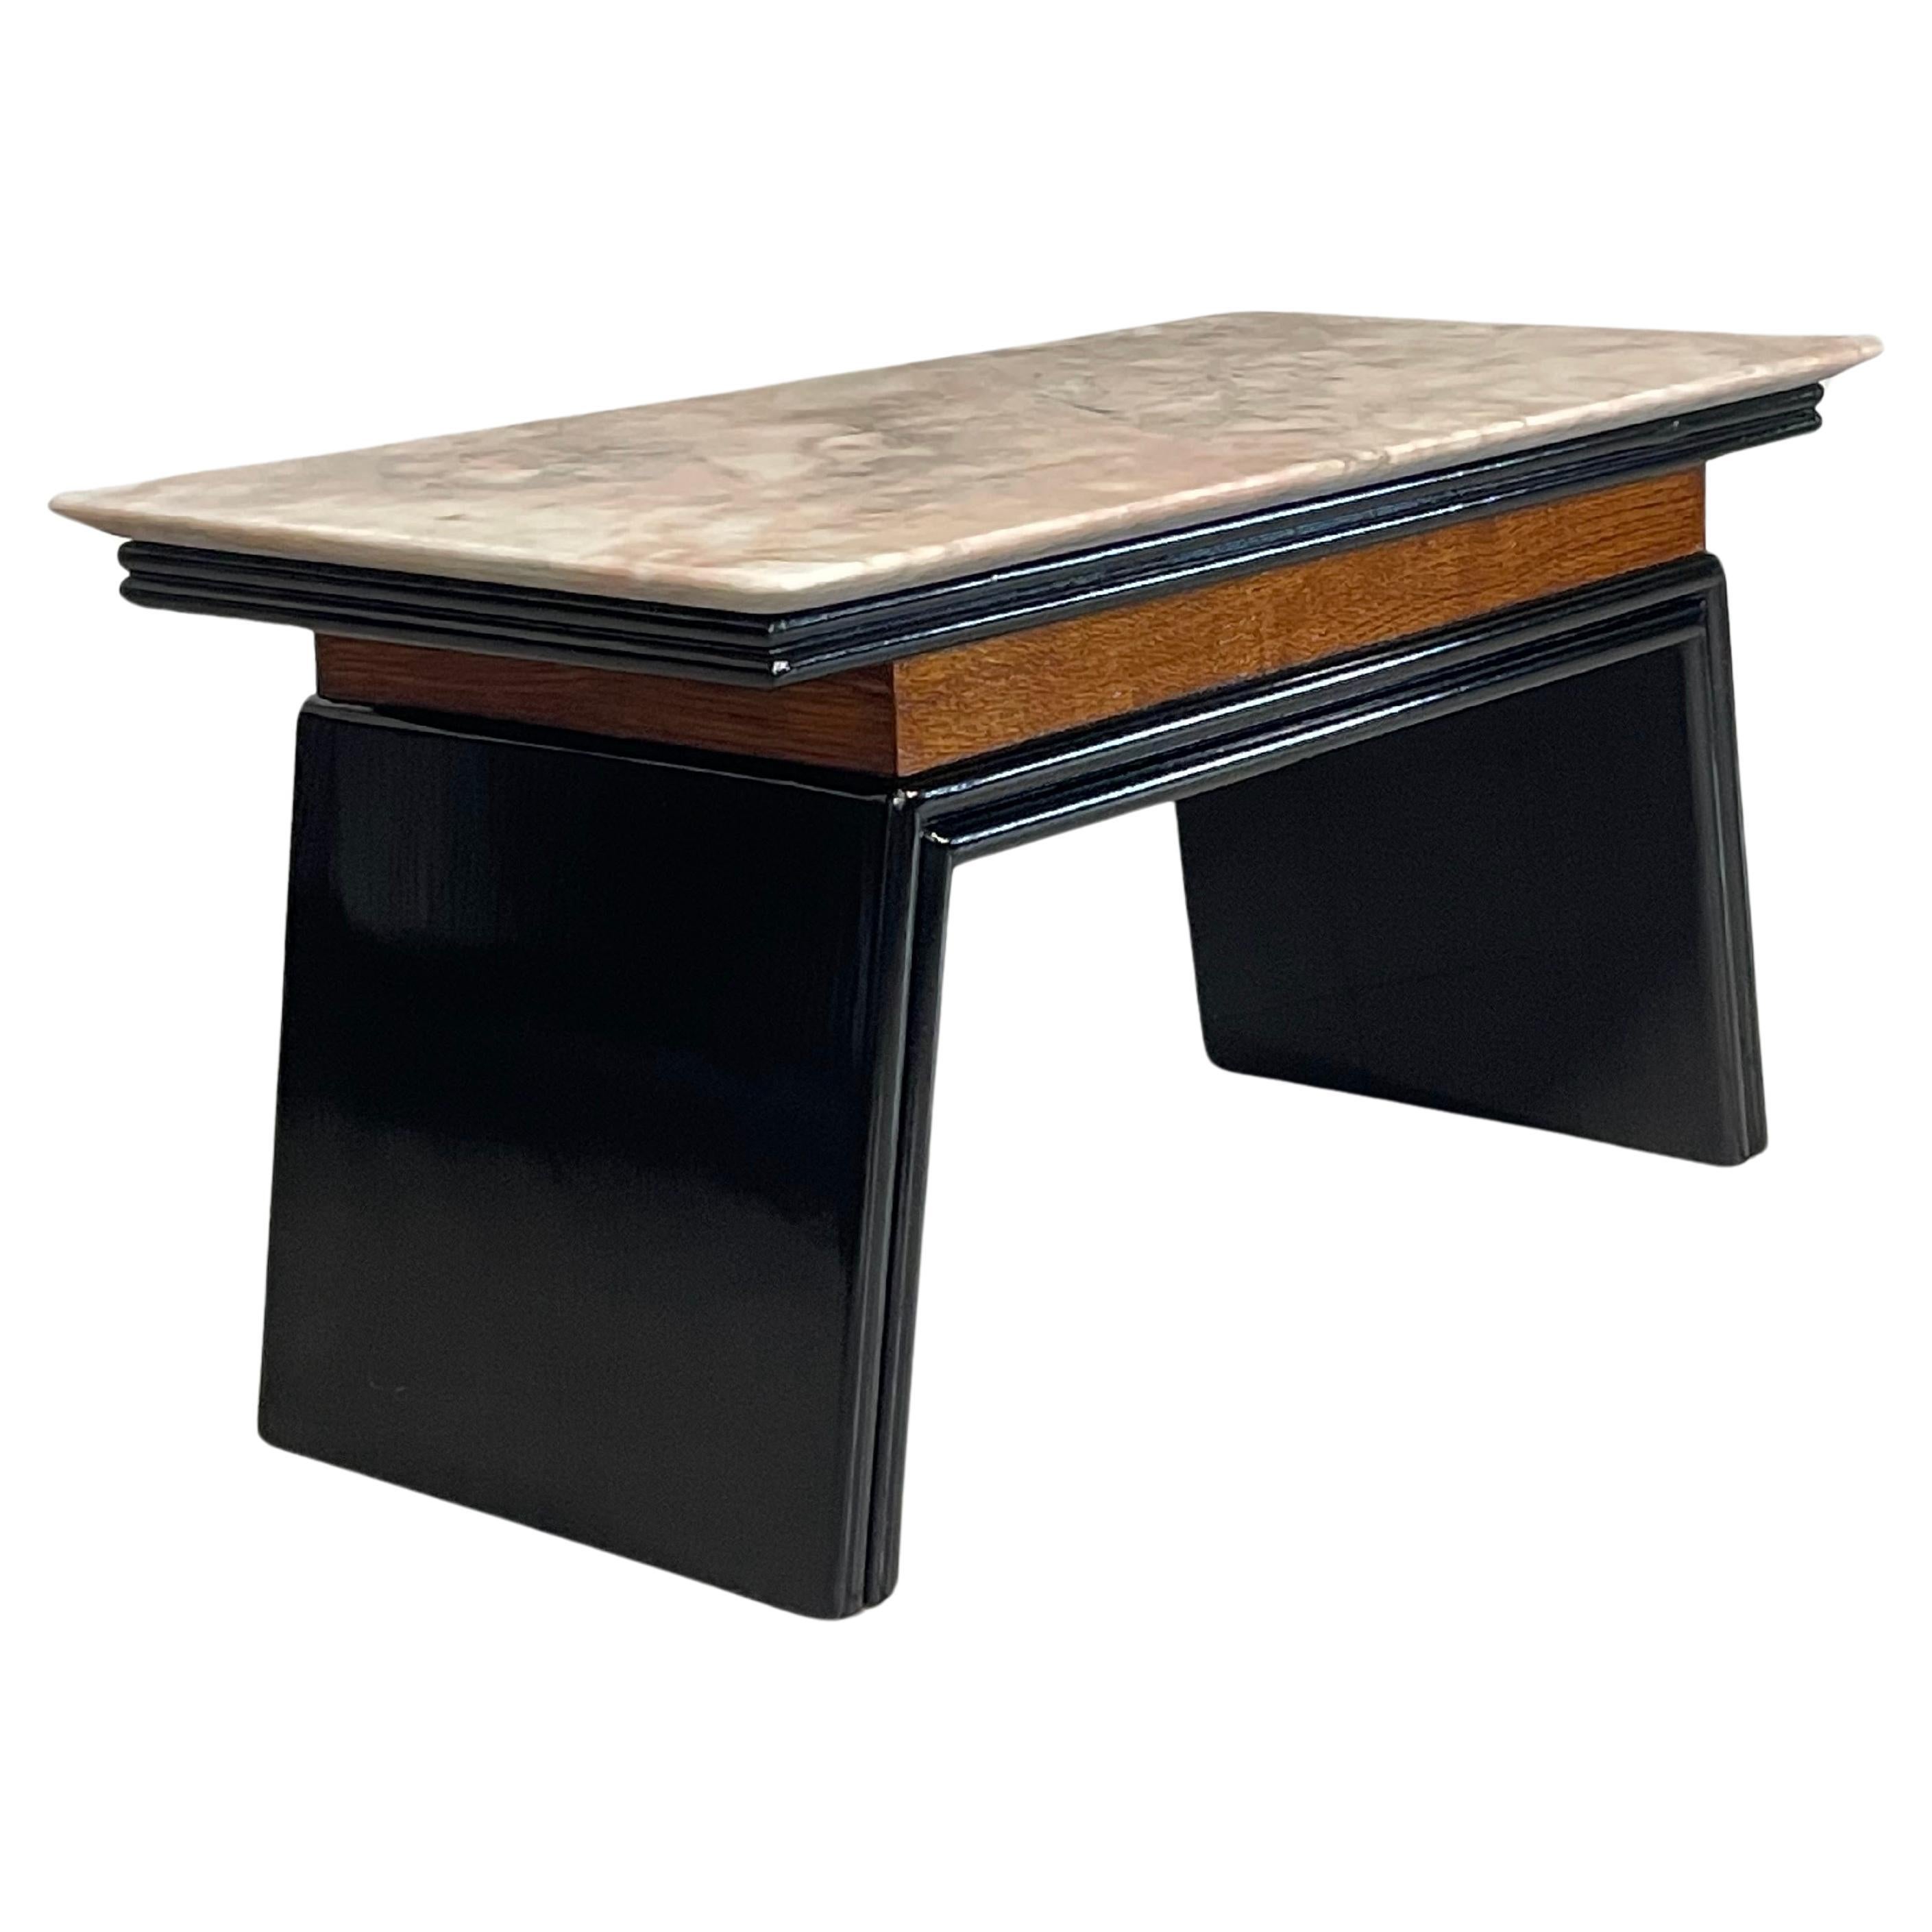 1940s-50s coffee table in the style of Osvaldo Borsani For Sale